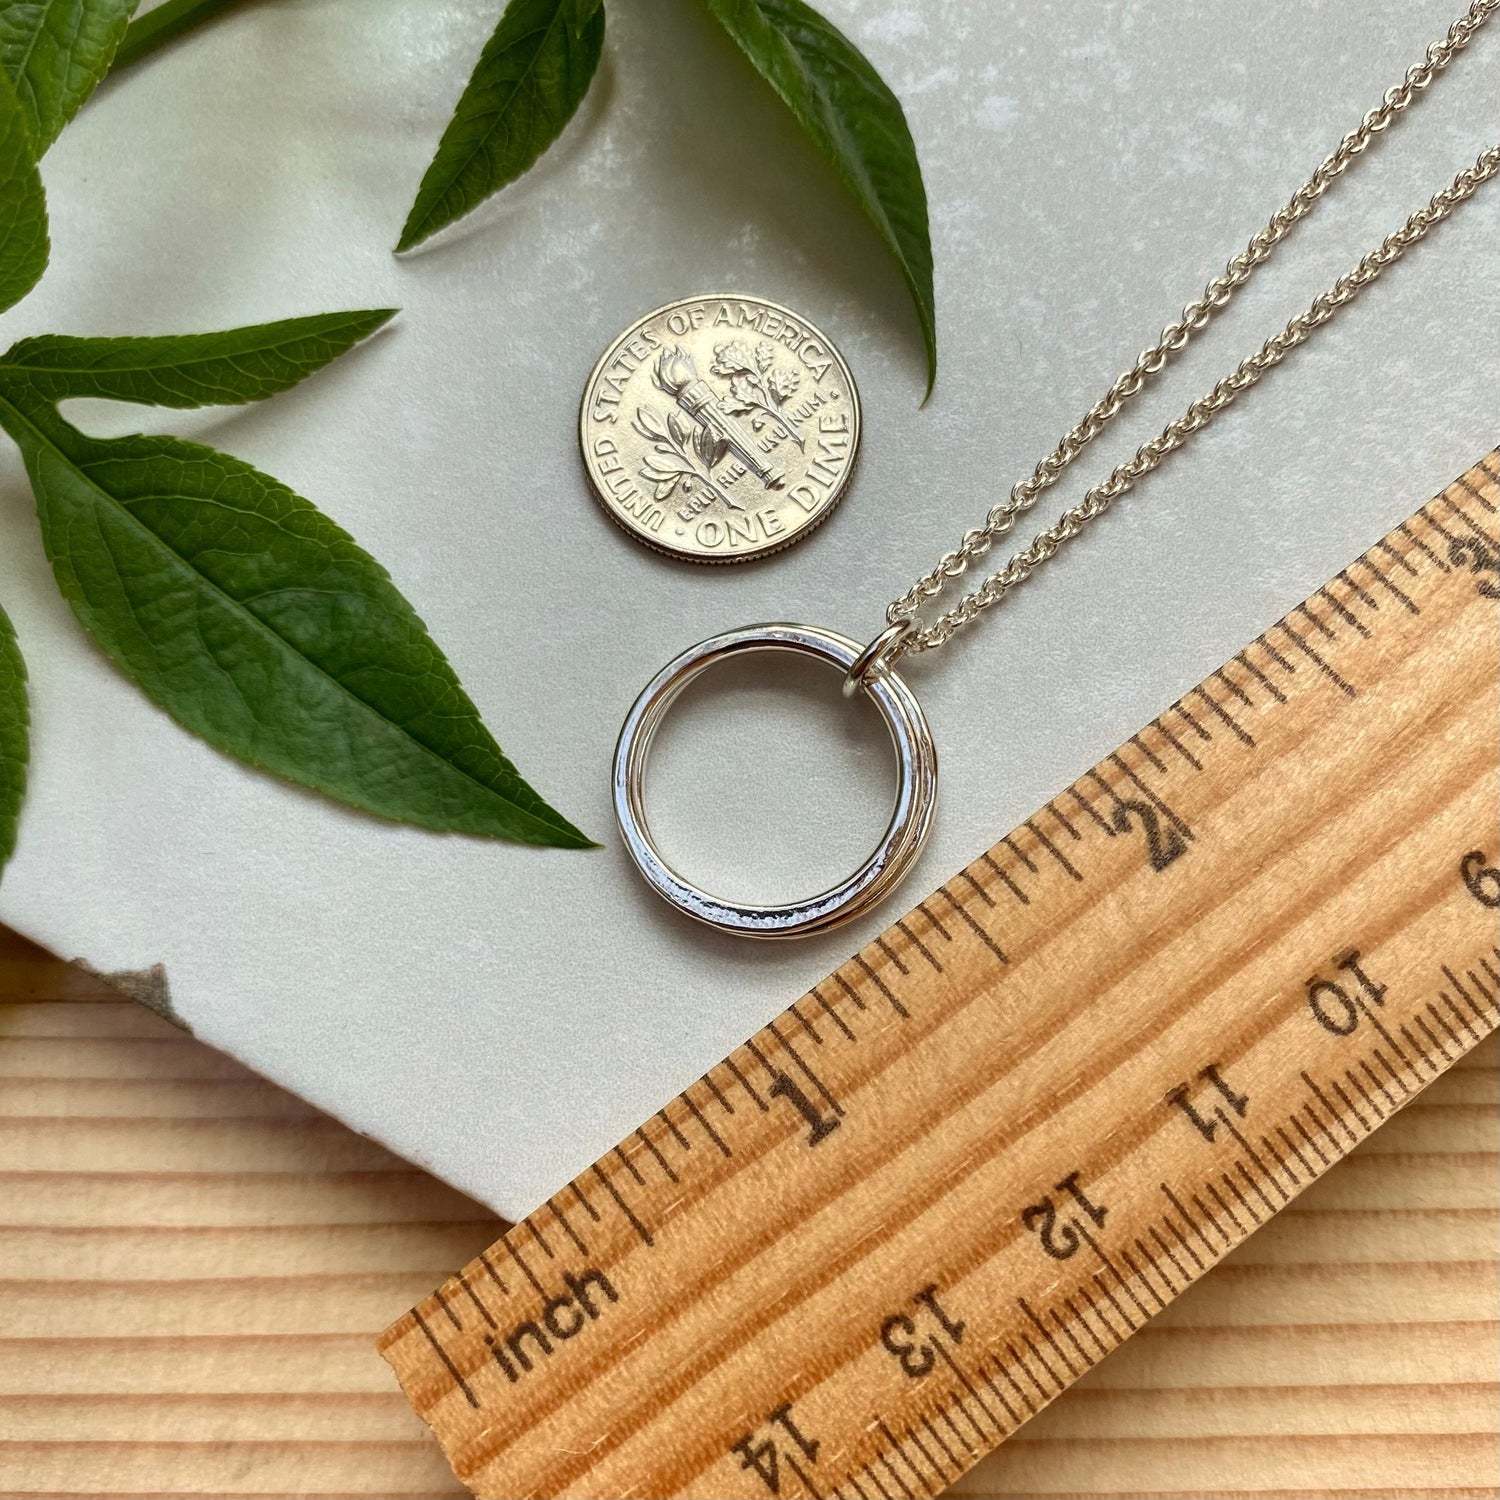 Sterling Silver Double Circle Necklace, 2 Handcrafted Circles Pendant, Friendship Connection Love Gift for Her or 20th Birthday, Anniversary